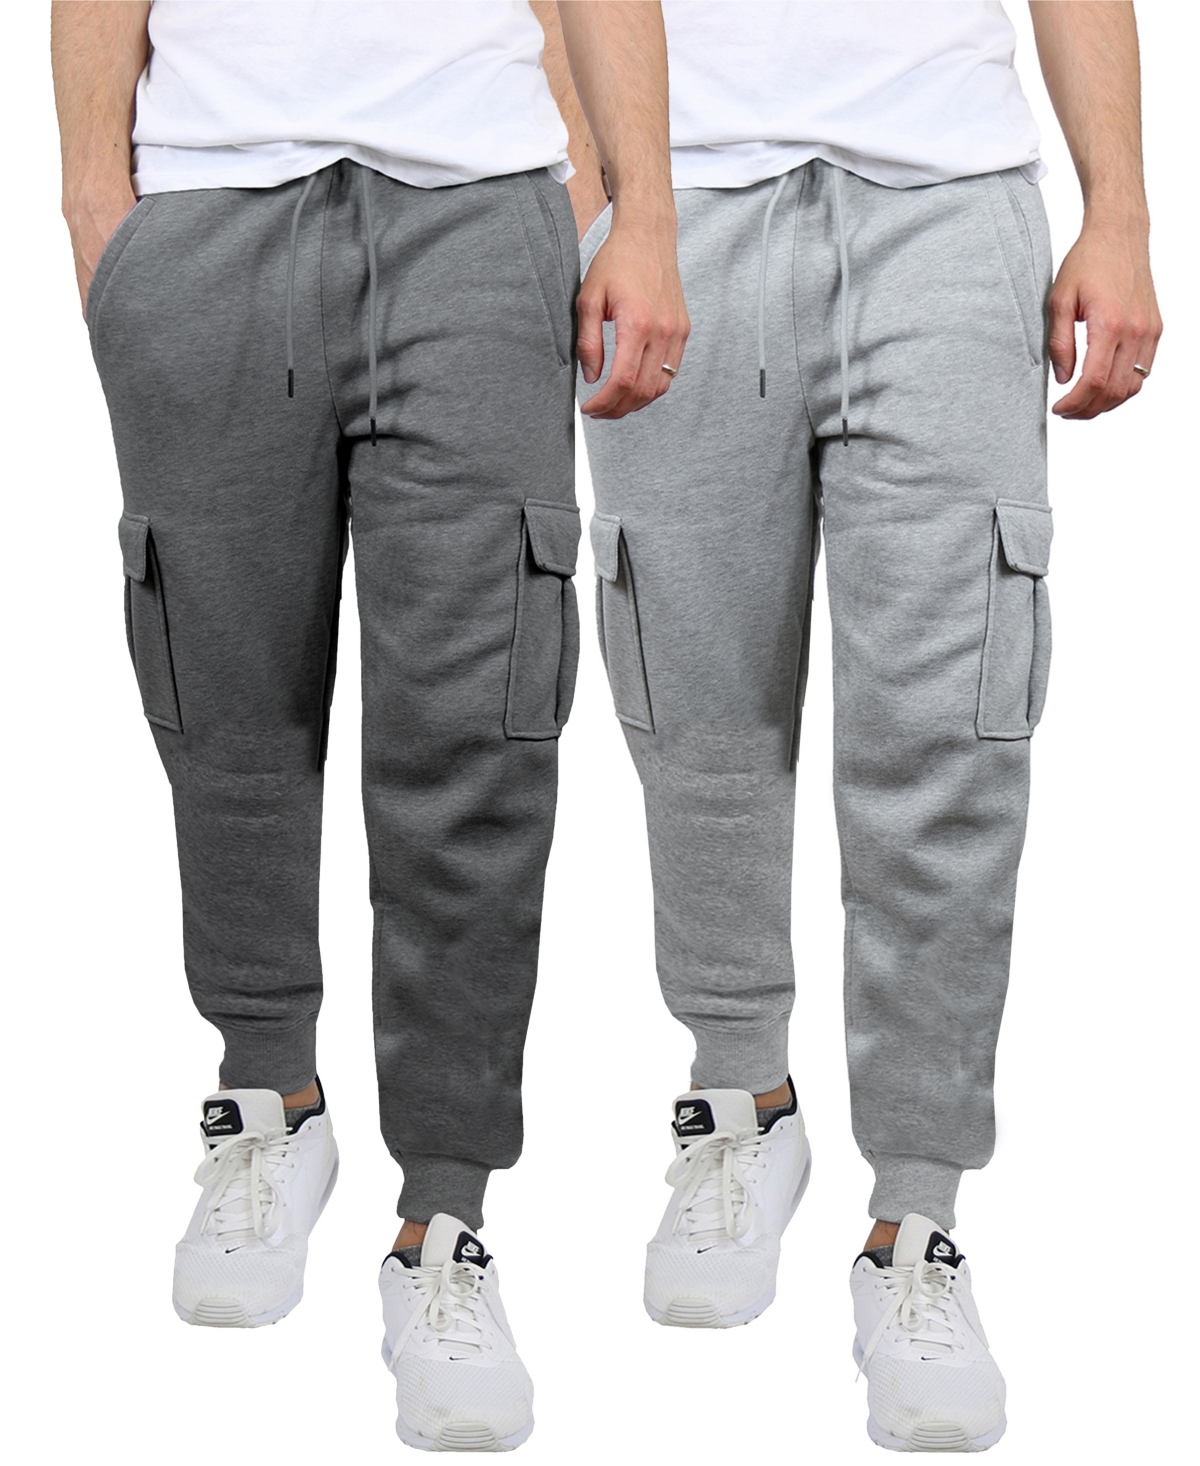 Blue Ice Men's Heavyweight Fleece-lined Cargo Jogger Sweatpants, Pack Of 2 In Charcoal-heather Gray